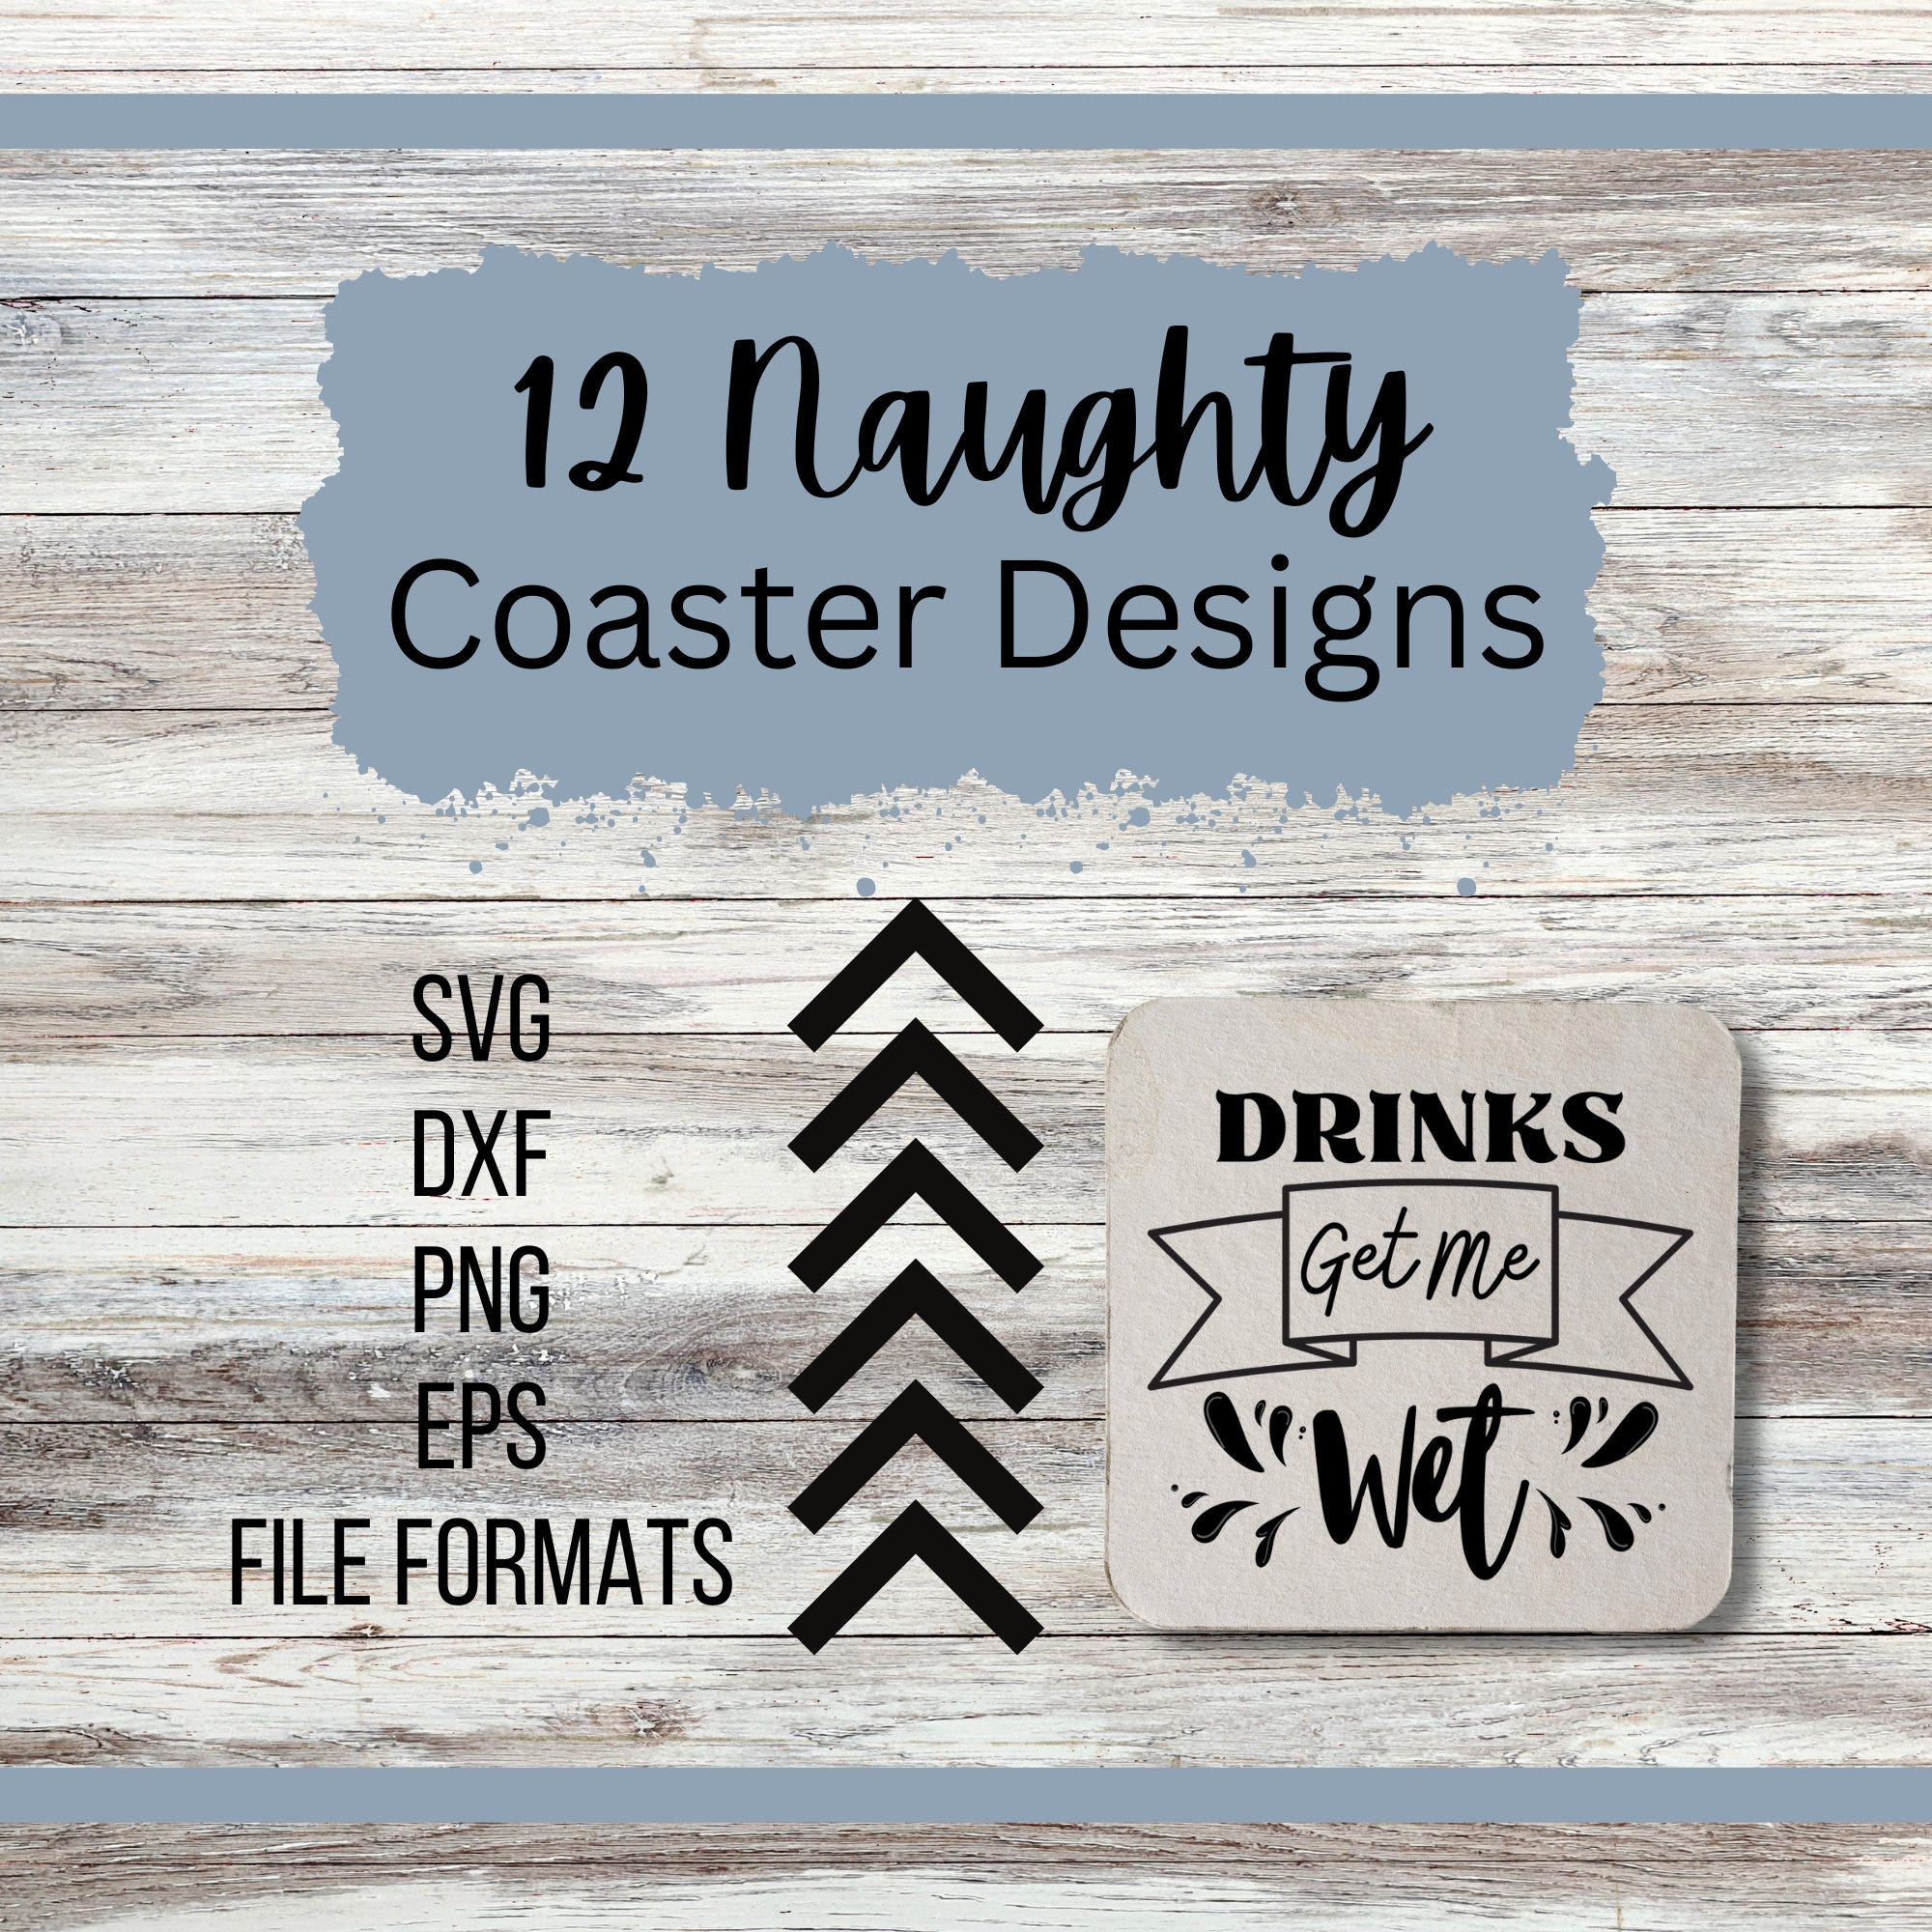 Naughty Digital Coaster Designs, Funny Coaster Quotes, Sarcastic Coaster Quotes, PNG, EPS, SVG, Dxf file formats